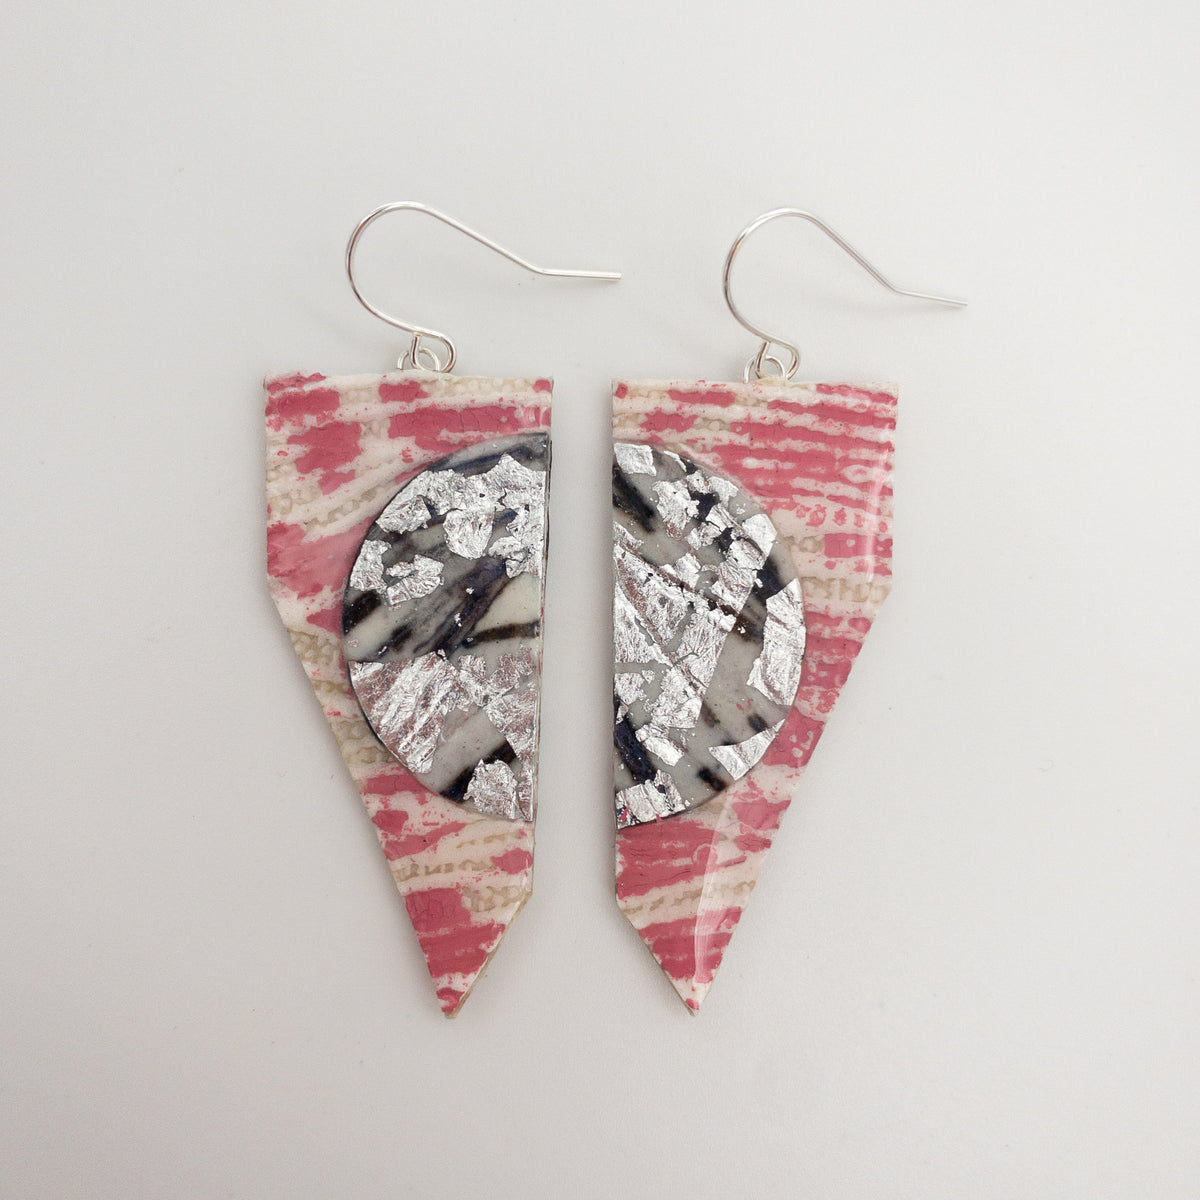 Coquette textile earrings in pink/grey/silver